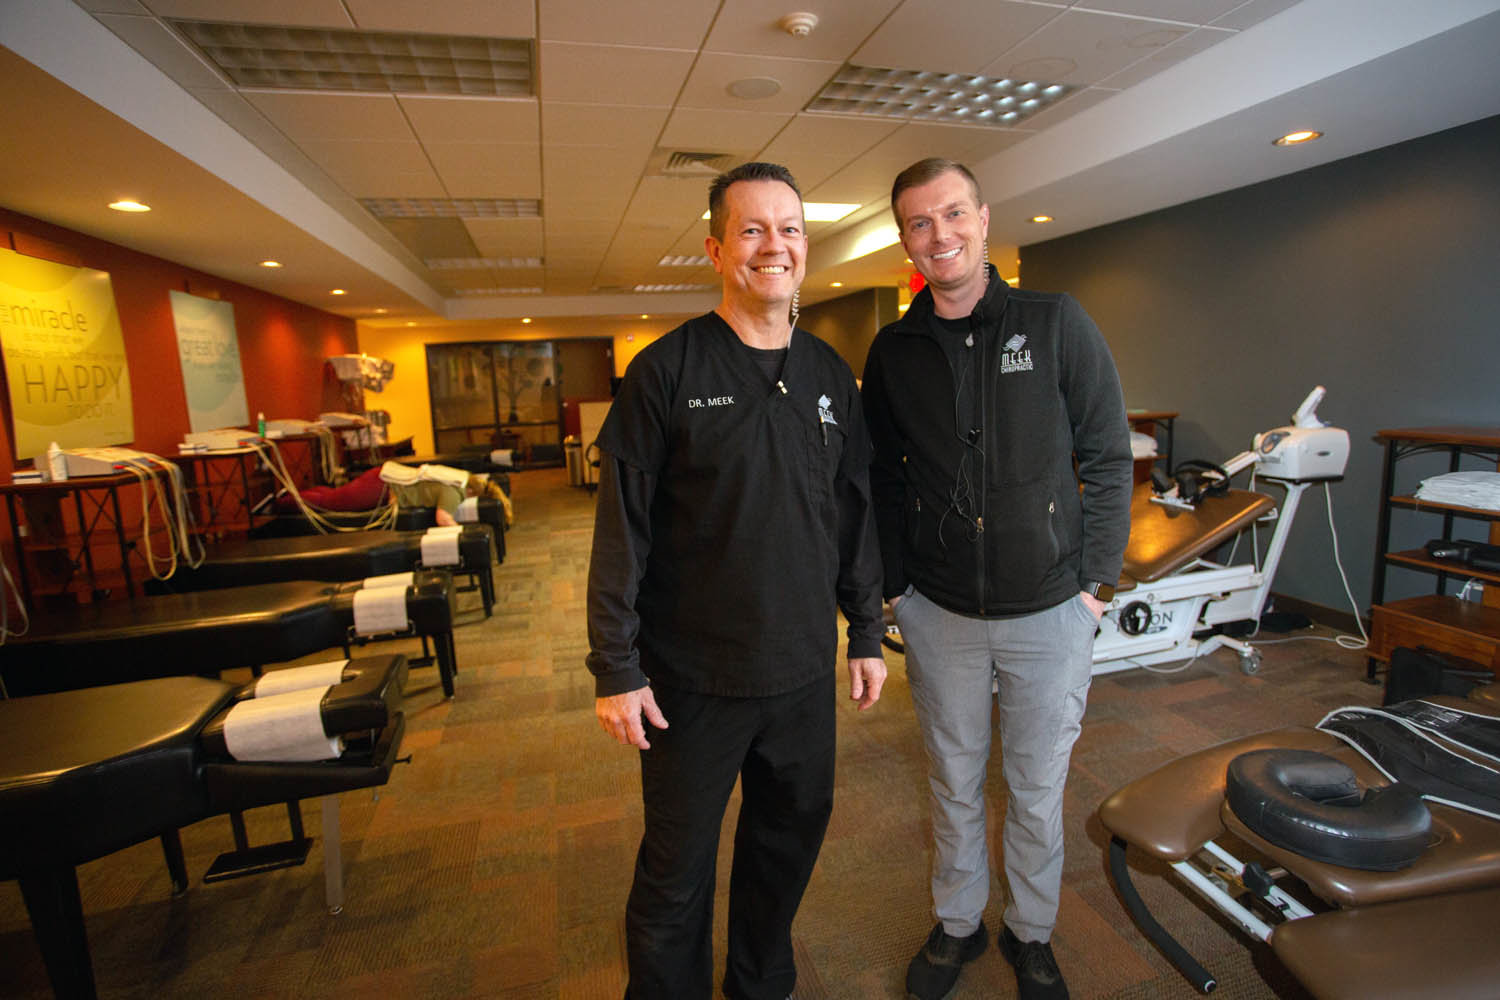 STRETCHING THE SERVICES: Dr. Gary Meek, left, is expanding his range of medical care with the launch of 180 Health, slated to open in early 2020, led by Clint Cunningham.